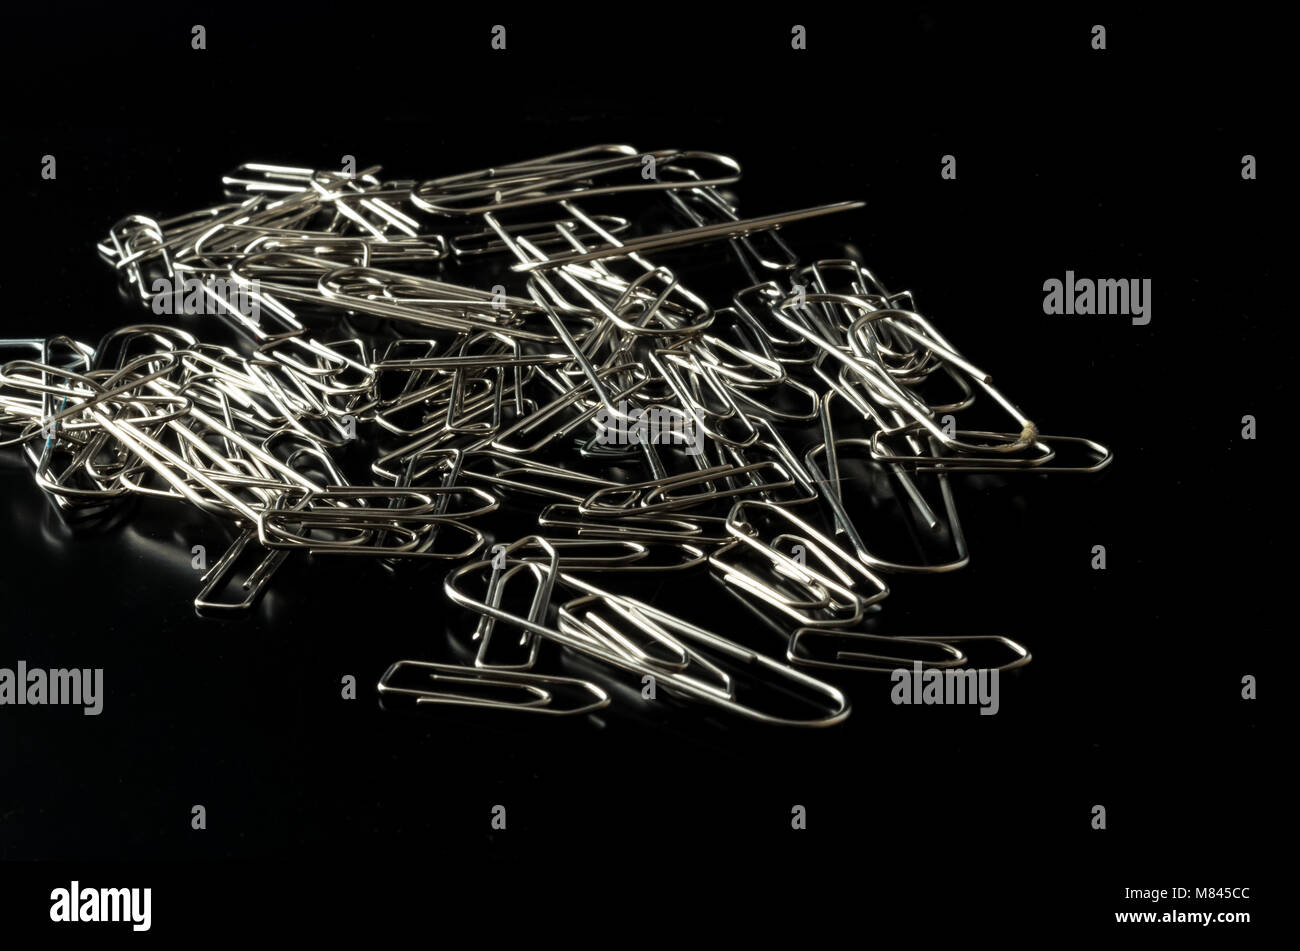 Pile of metal paper clips on reflective black background Stock Photo